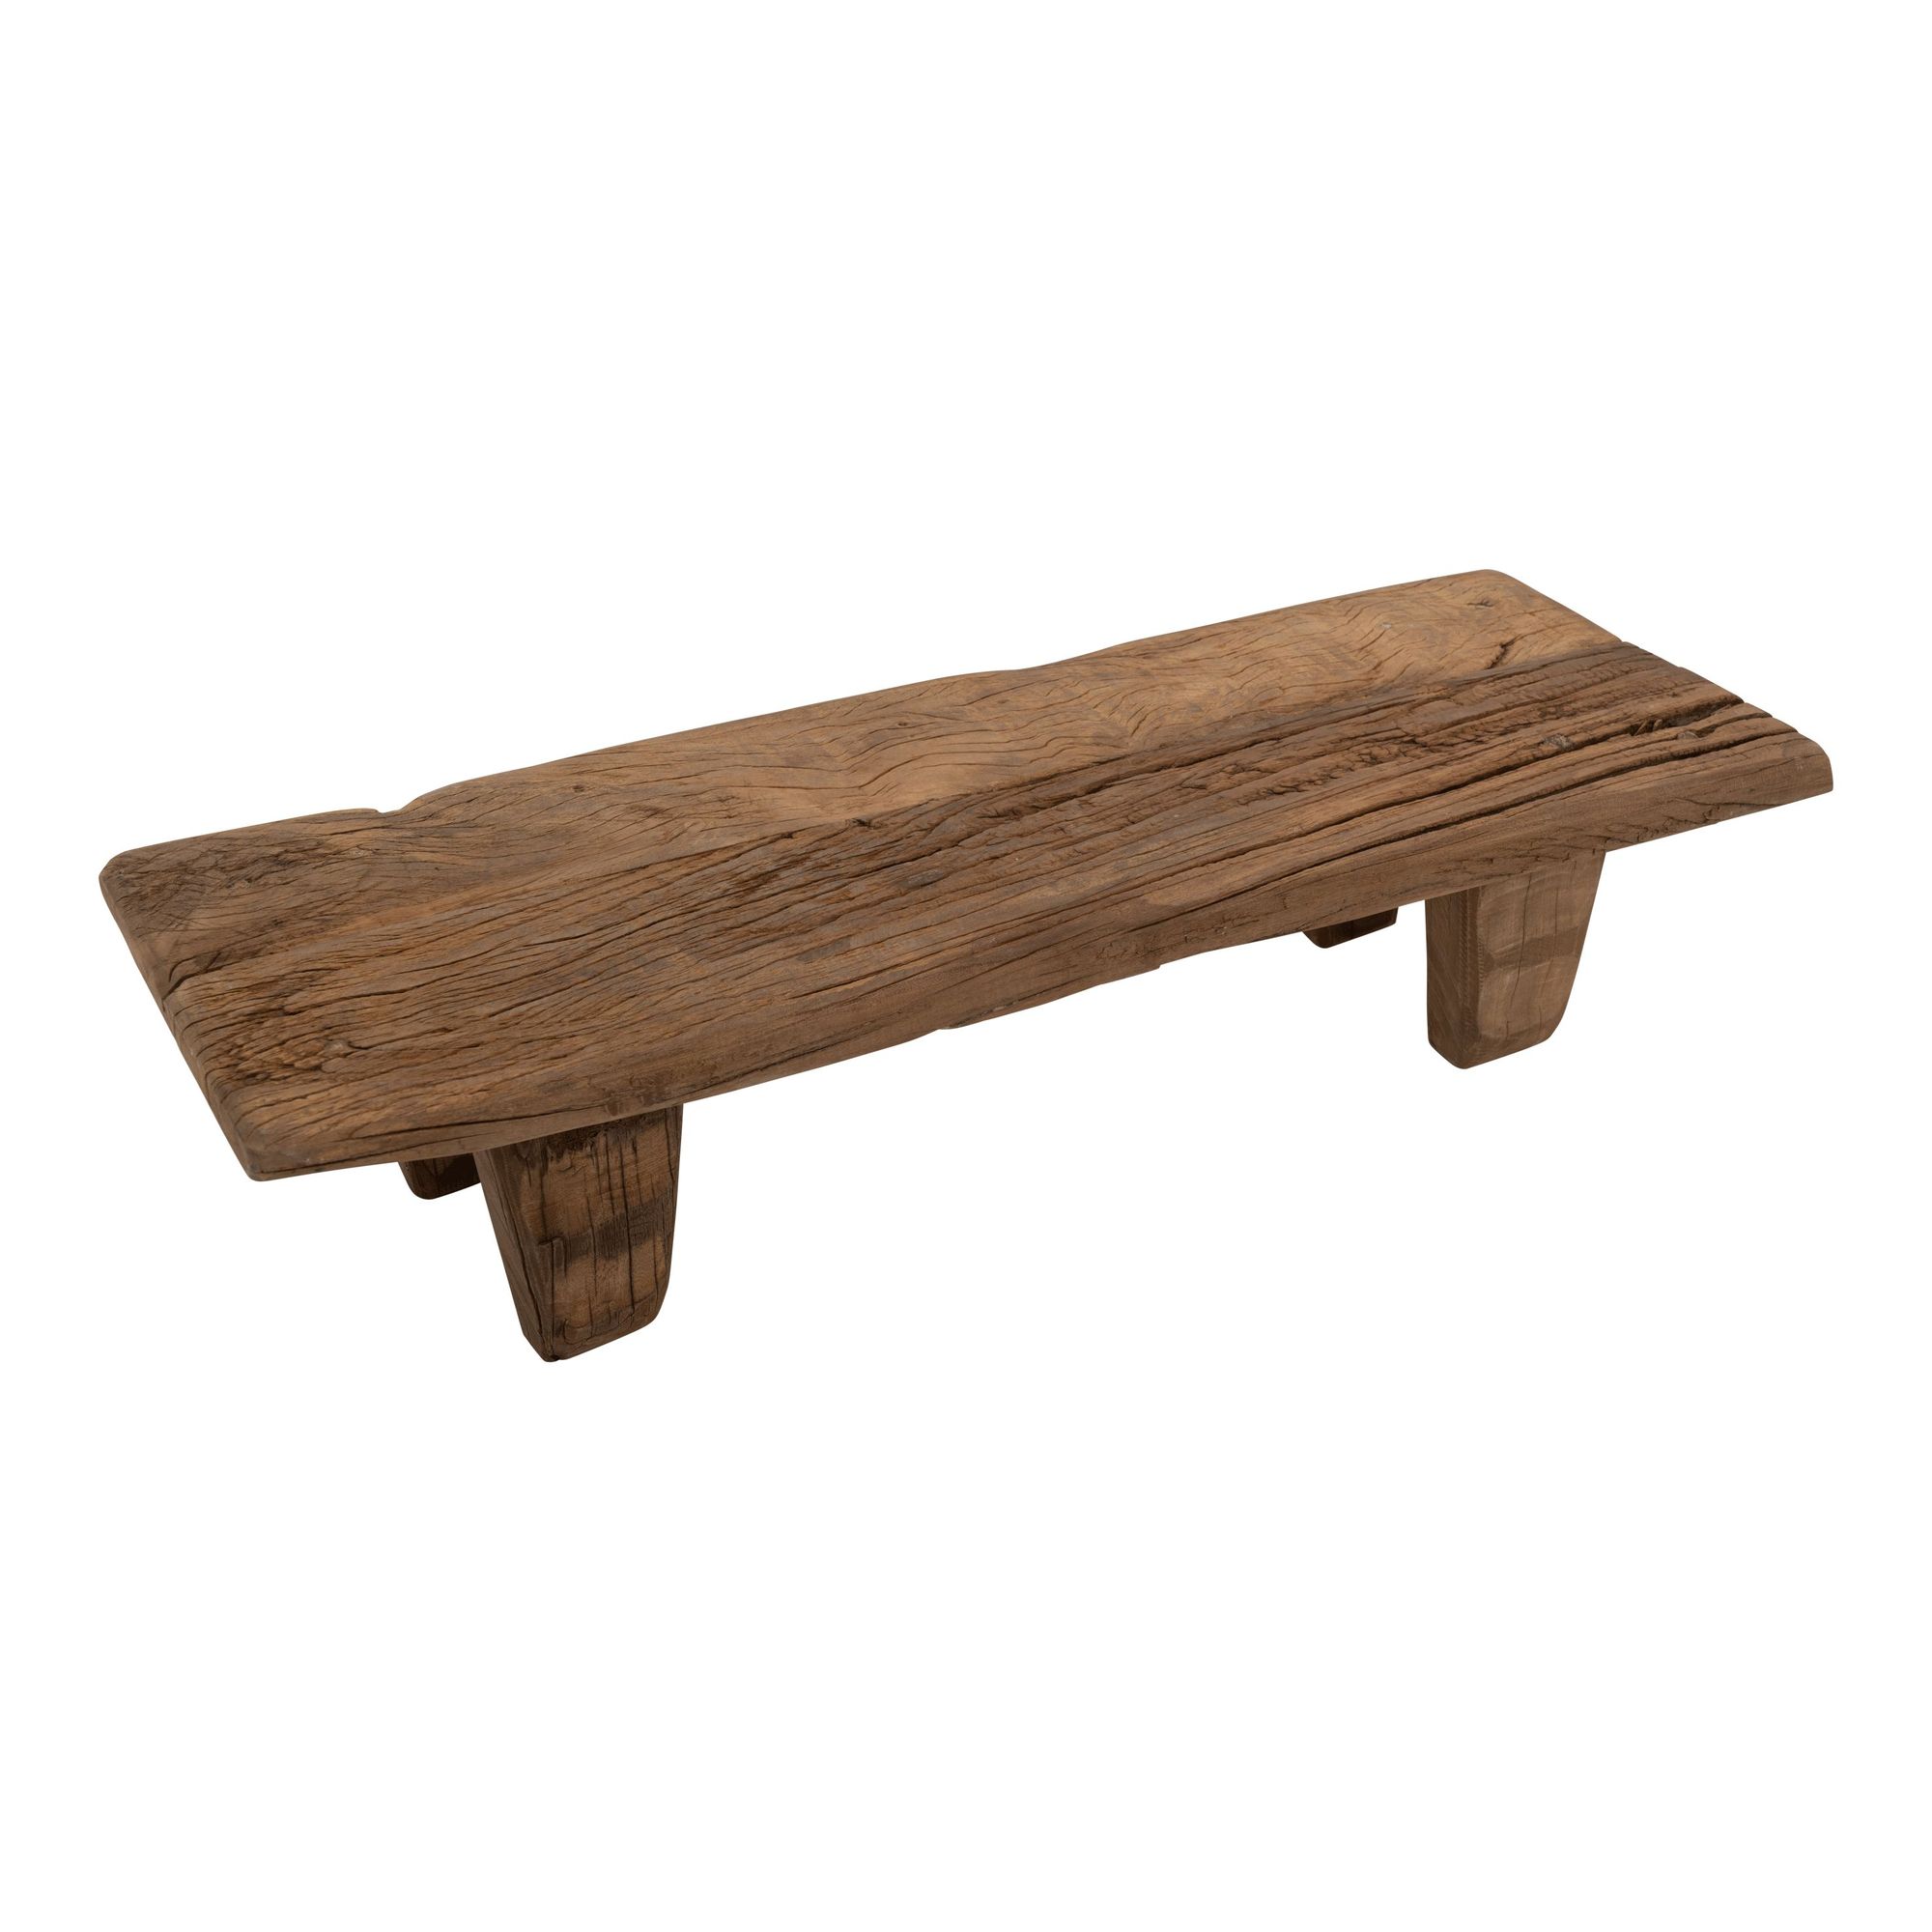 Unc Bench Reclaimed Wood Gift